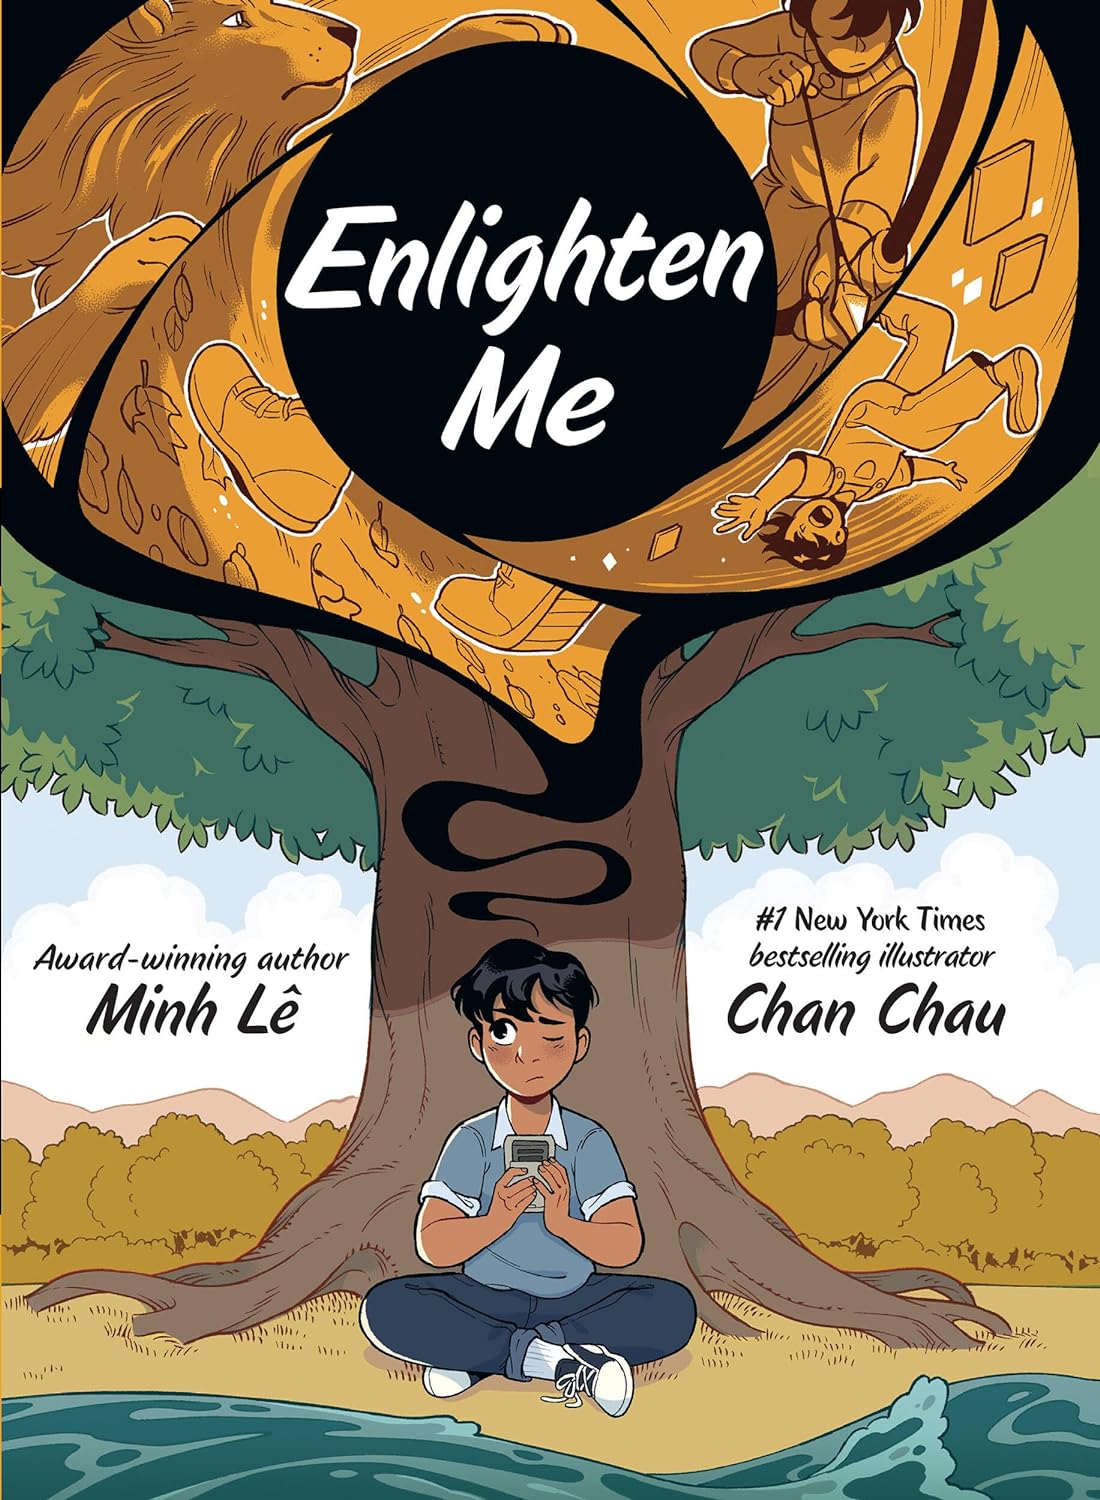 Cover of Enlighten Me by Minh Lê, illustrated by Chan Chau